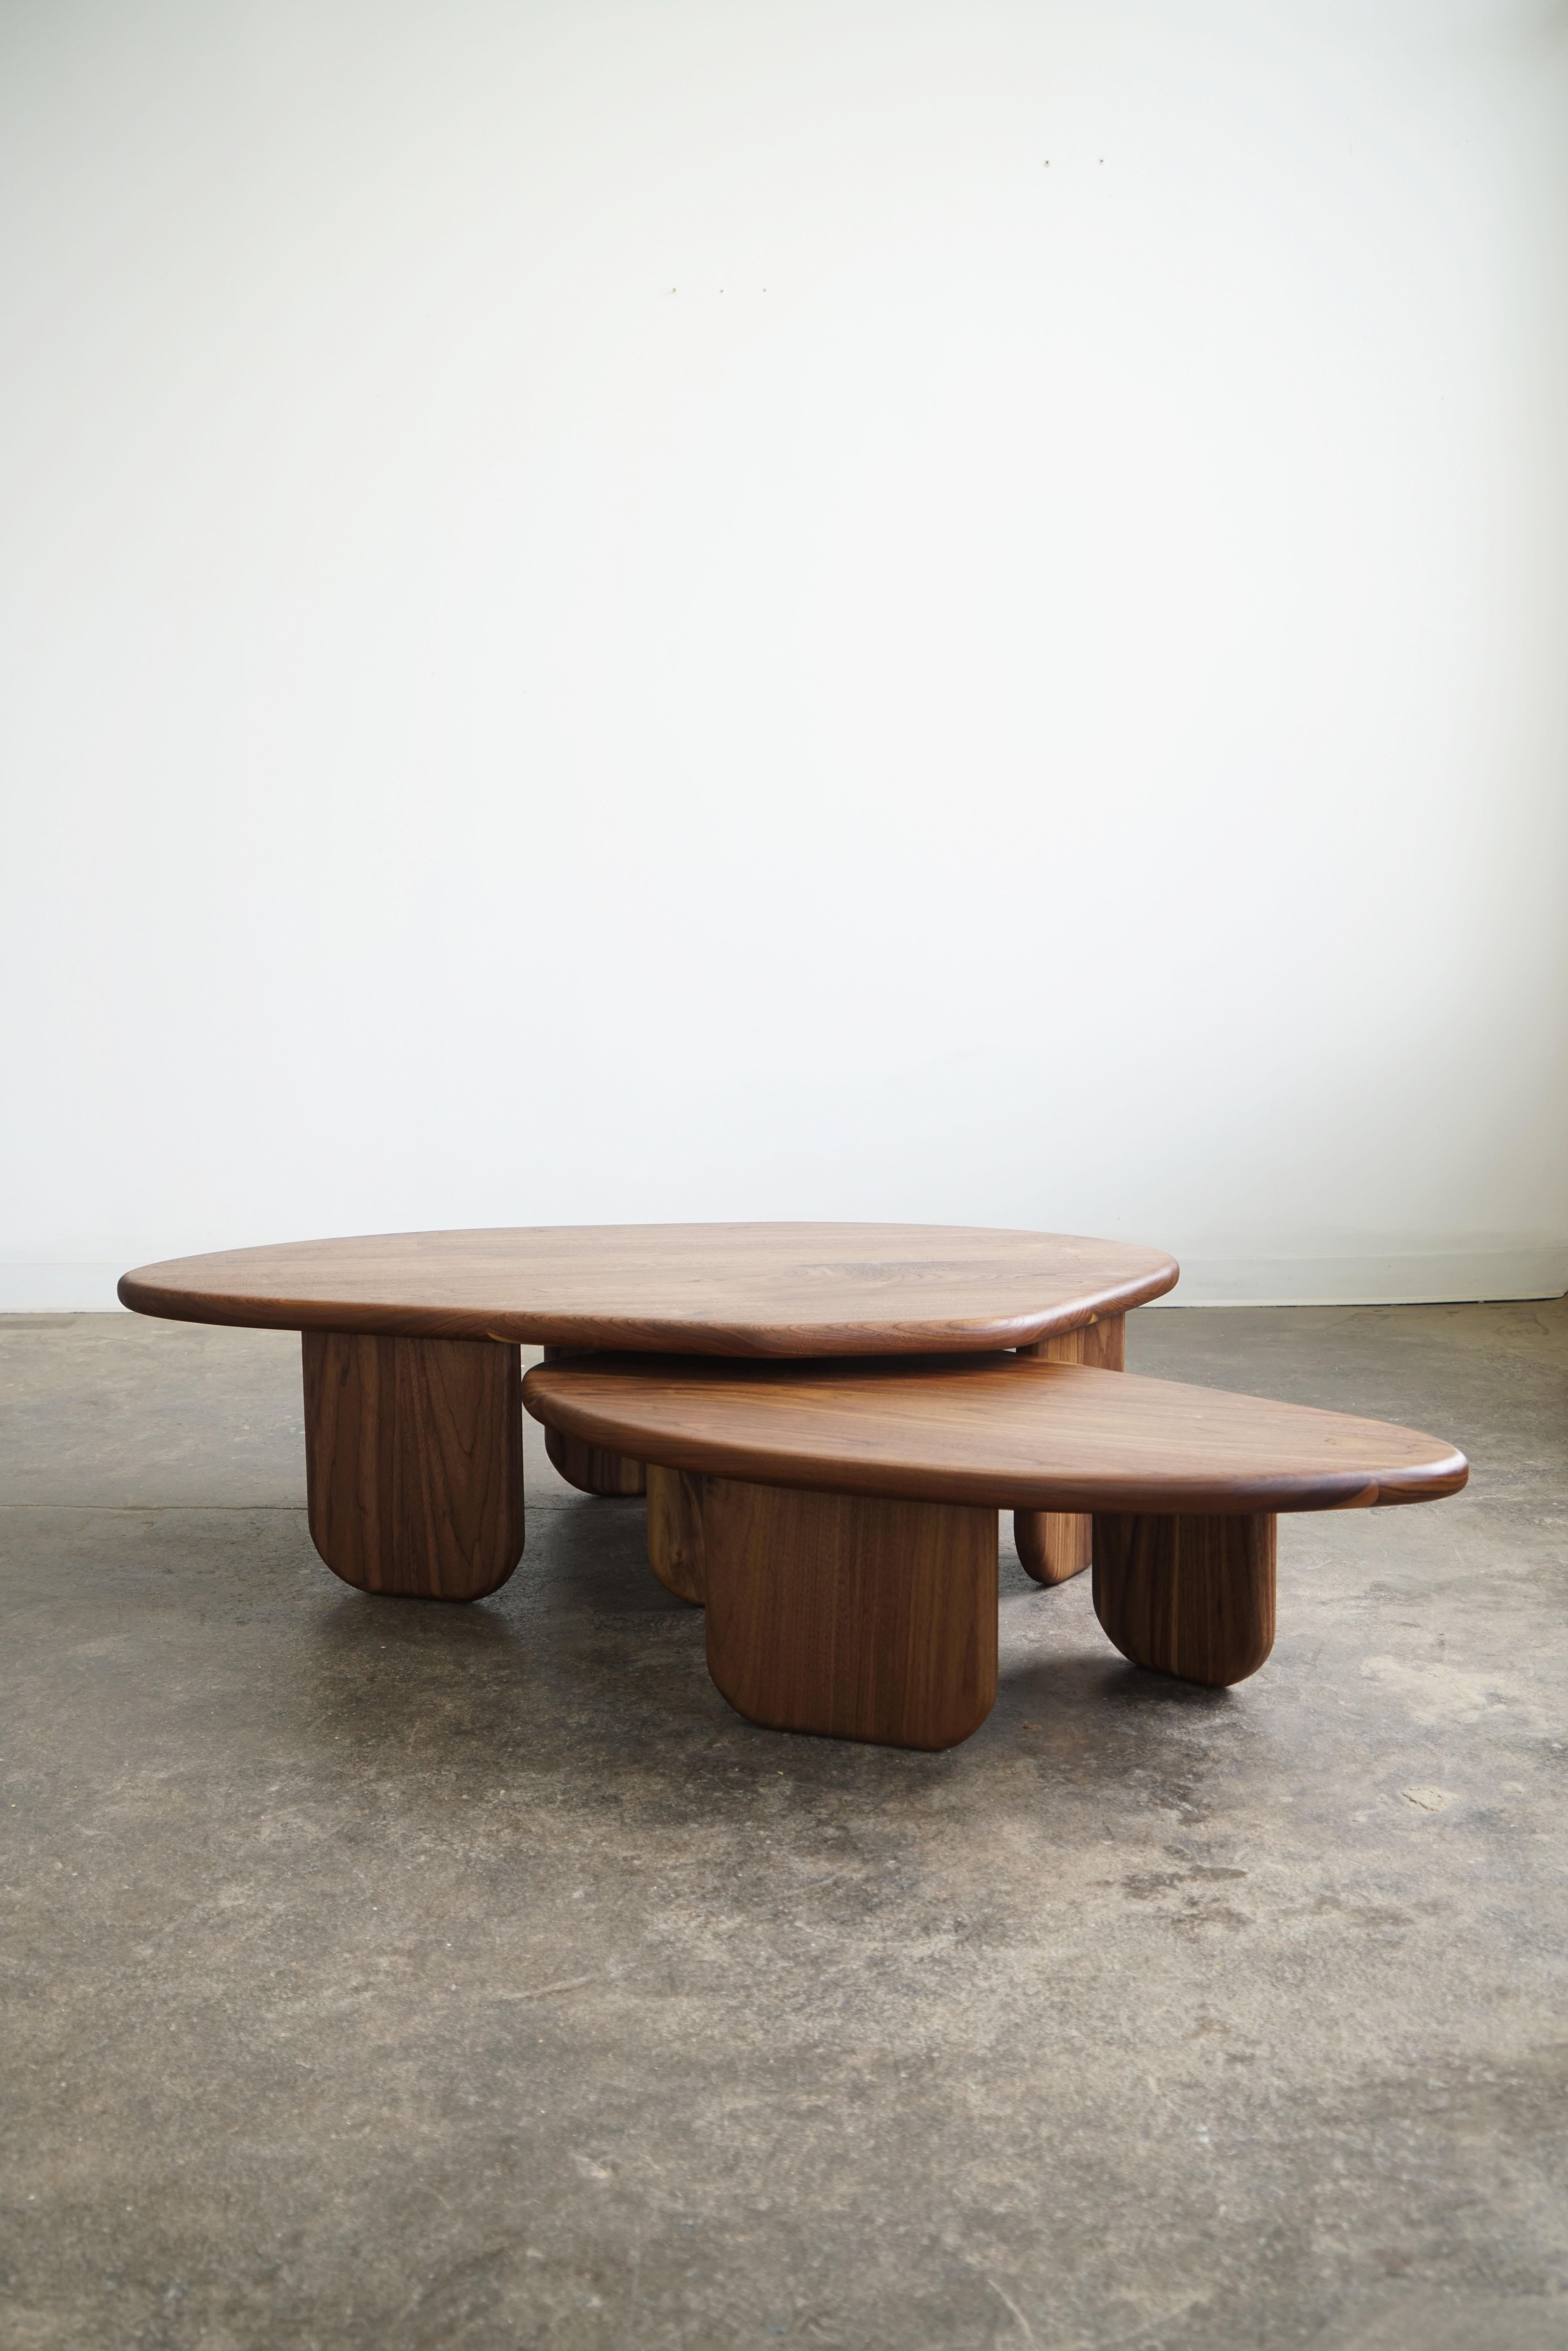 Organic shaped nesting coffee tables by Last Workshop, 2023
Solid walnut, natural finish

Table one: 58